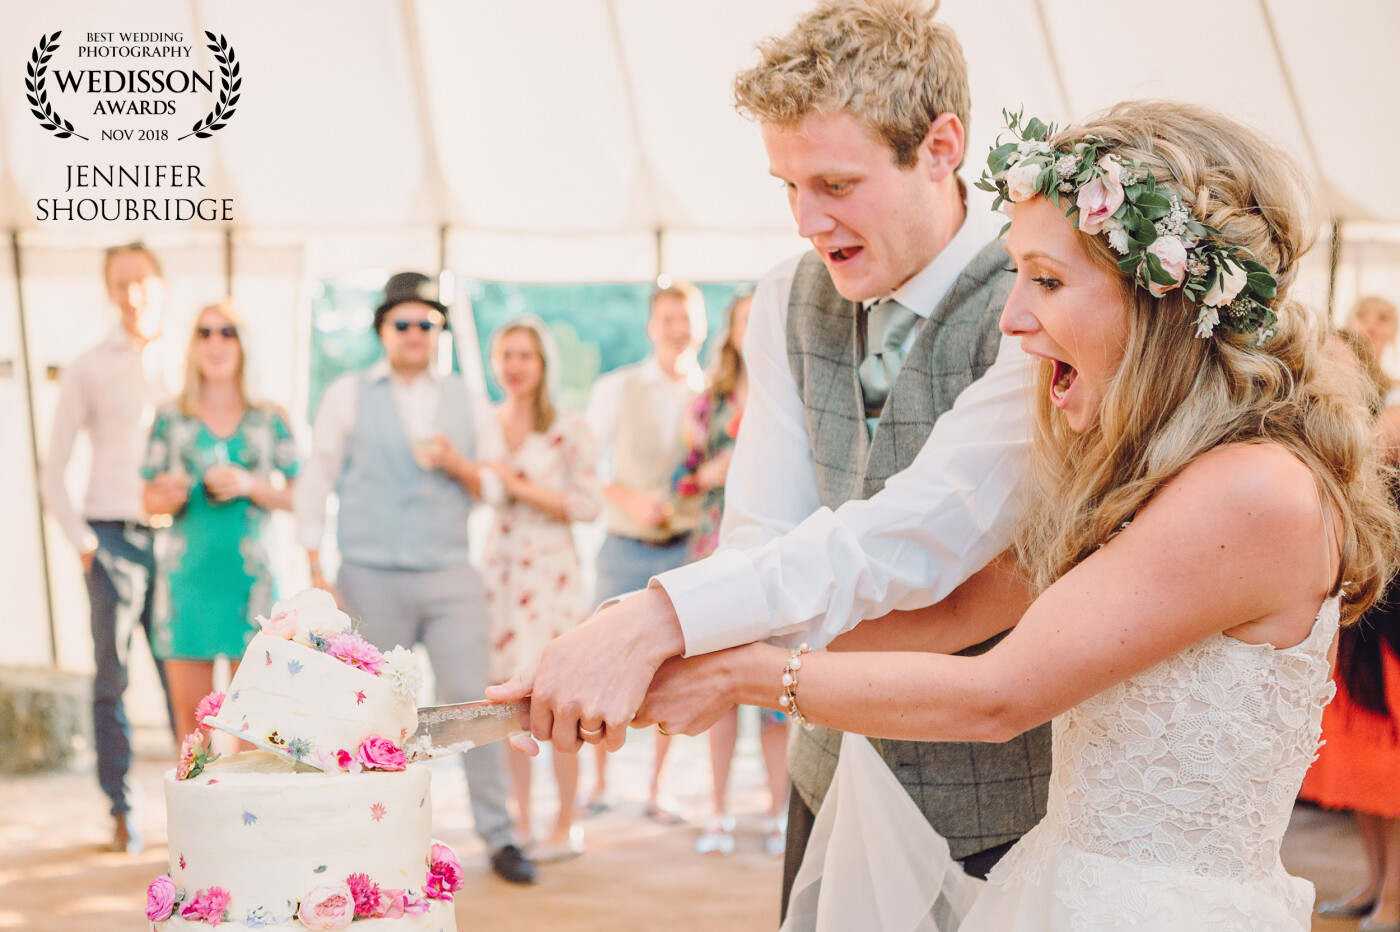 It had been the hottest day and the cake although brought into the marquee and assembled later in the afternoon, was starting to feel the effects of the day. As Rosy and George cut into the top tier of the cake it started to lift up and almost come off. This shot is their expressions as it happened.